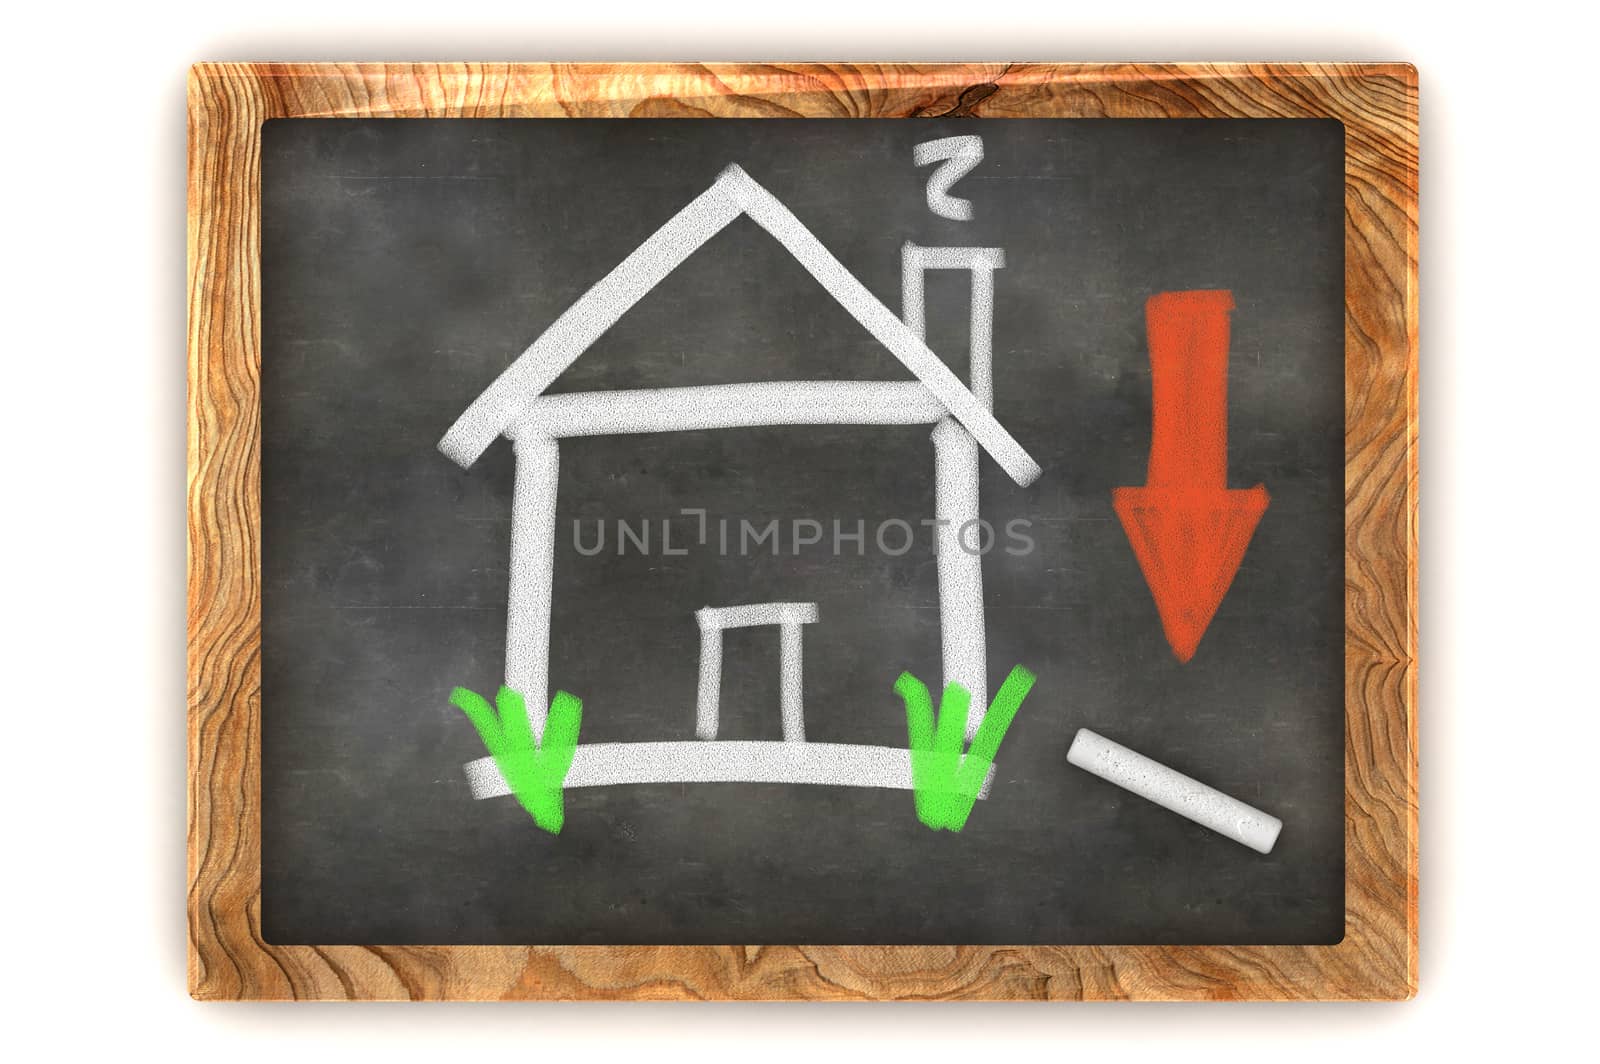 A Colourful 3d Rendered Concept Illustration showing the housing market decline on a Blackboard